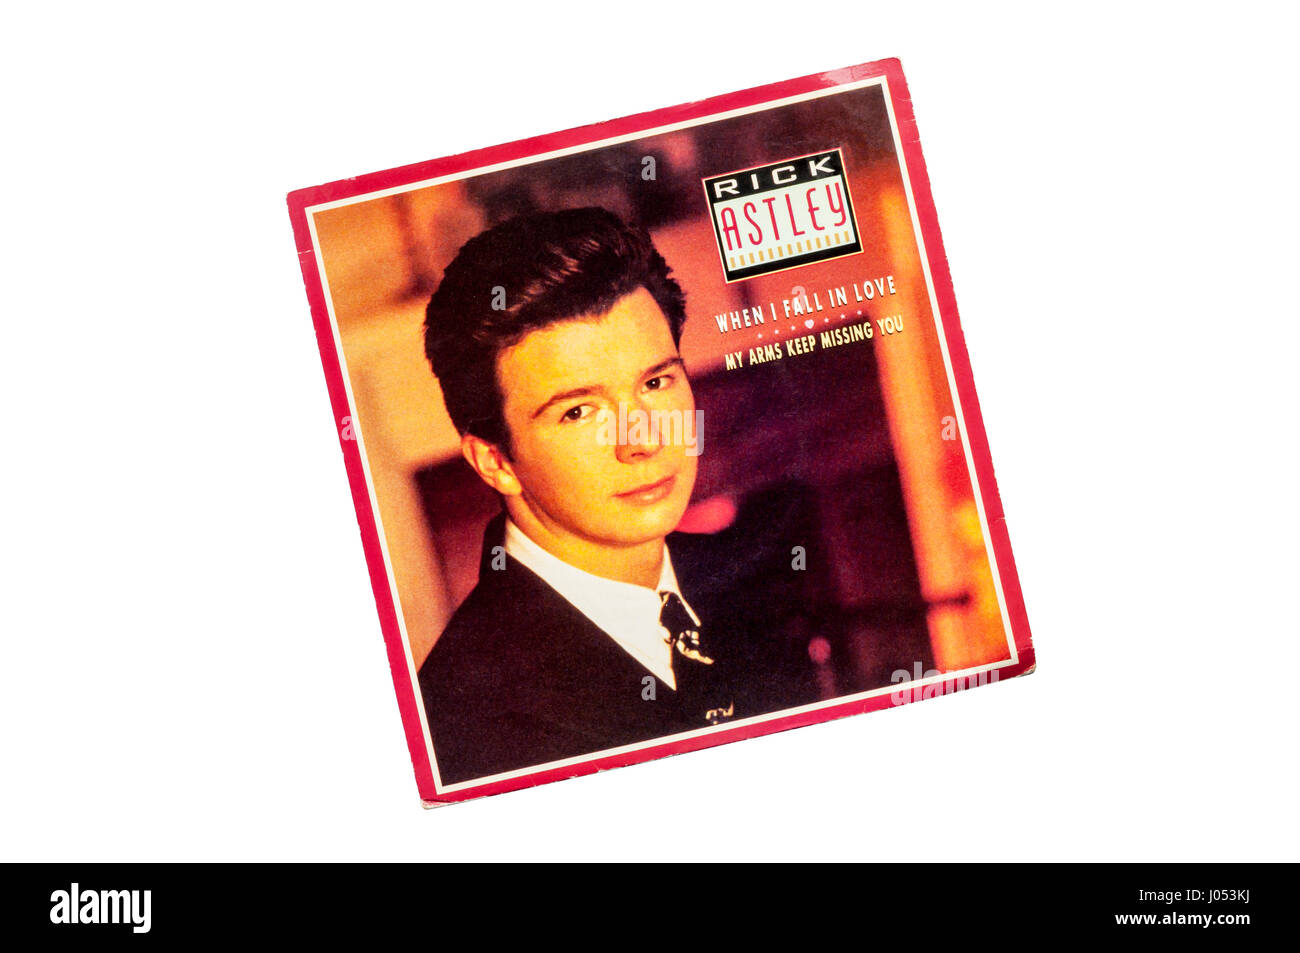 1987 7' single, When I Fall in Love by Rick Astley. Stock Photo